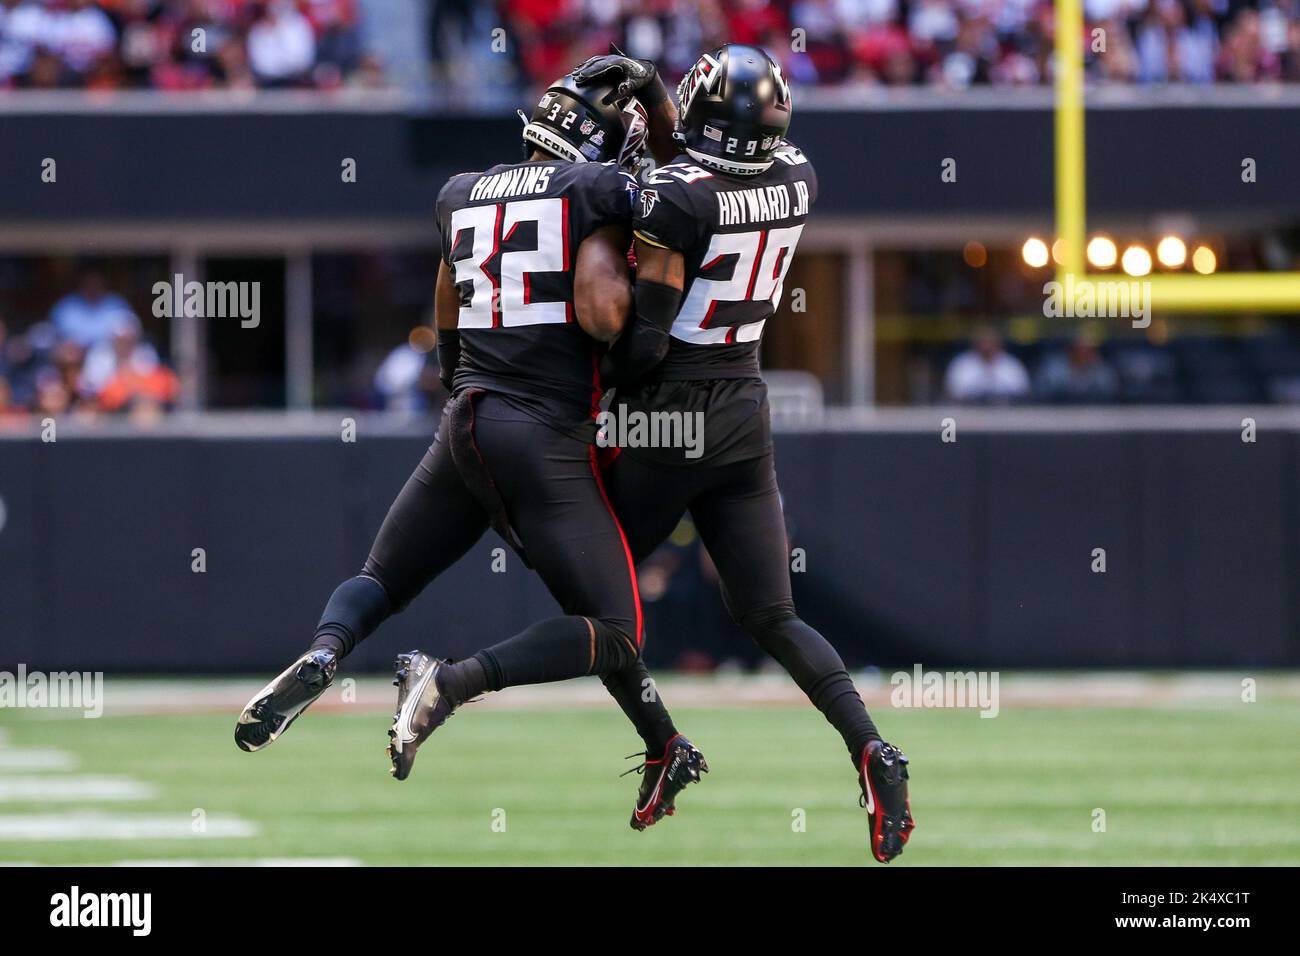 Atlanta Falcons safety Jaylinn Hawkins (32) works during the second half of  an NFL football game against the Tampa Bay Buccaneers, Sunday, Jan. 8,  2023, in Atlanta. The Atlanta Falcons won 30-17. (